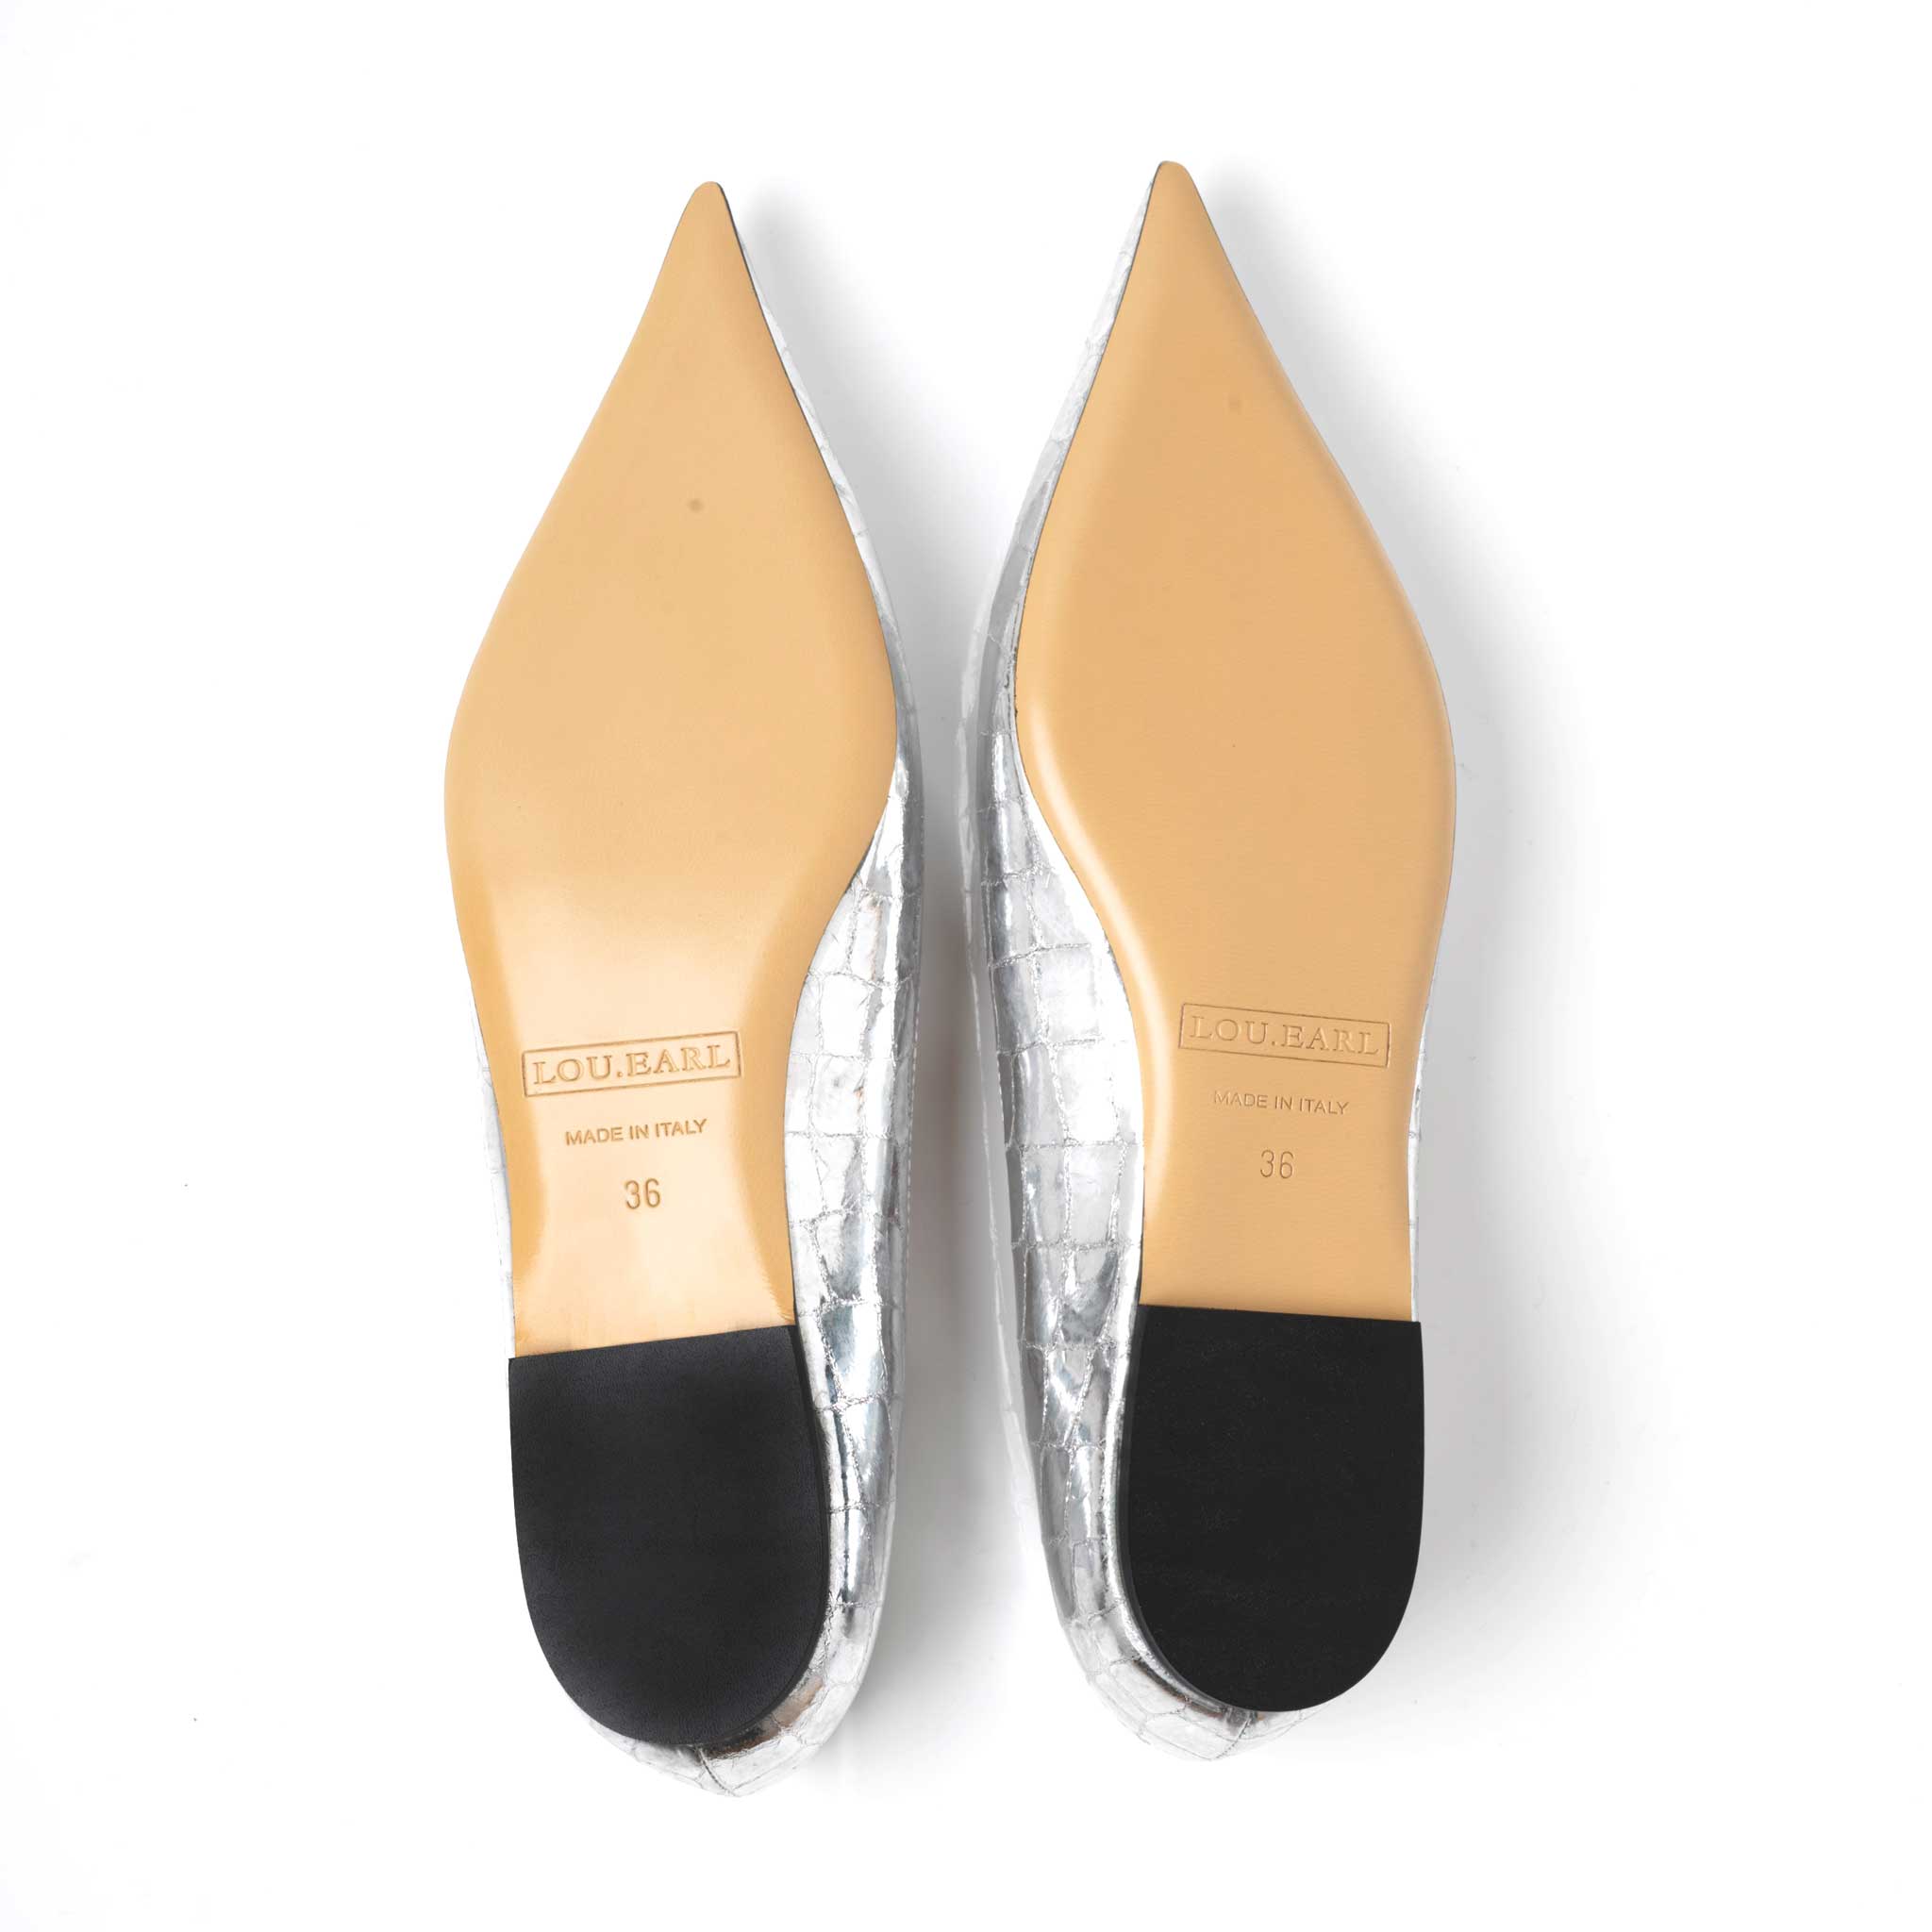 ultra pointed slip on flat shoes for women showing tan natural sole and black heel with logo stamped on outsole and "made in Italy"